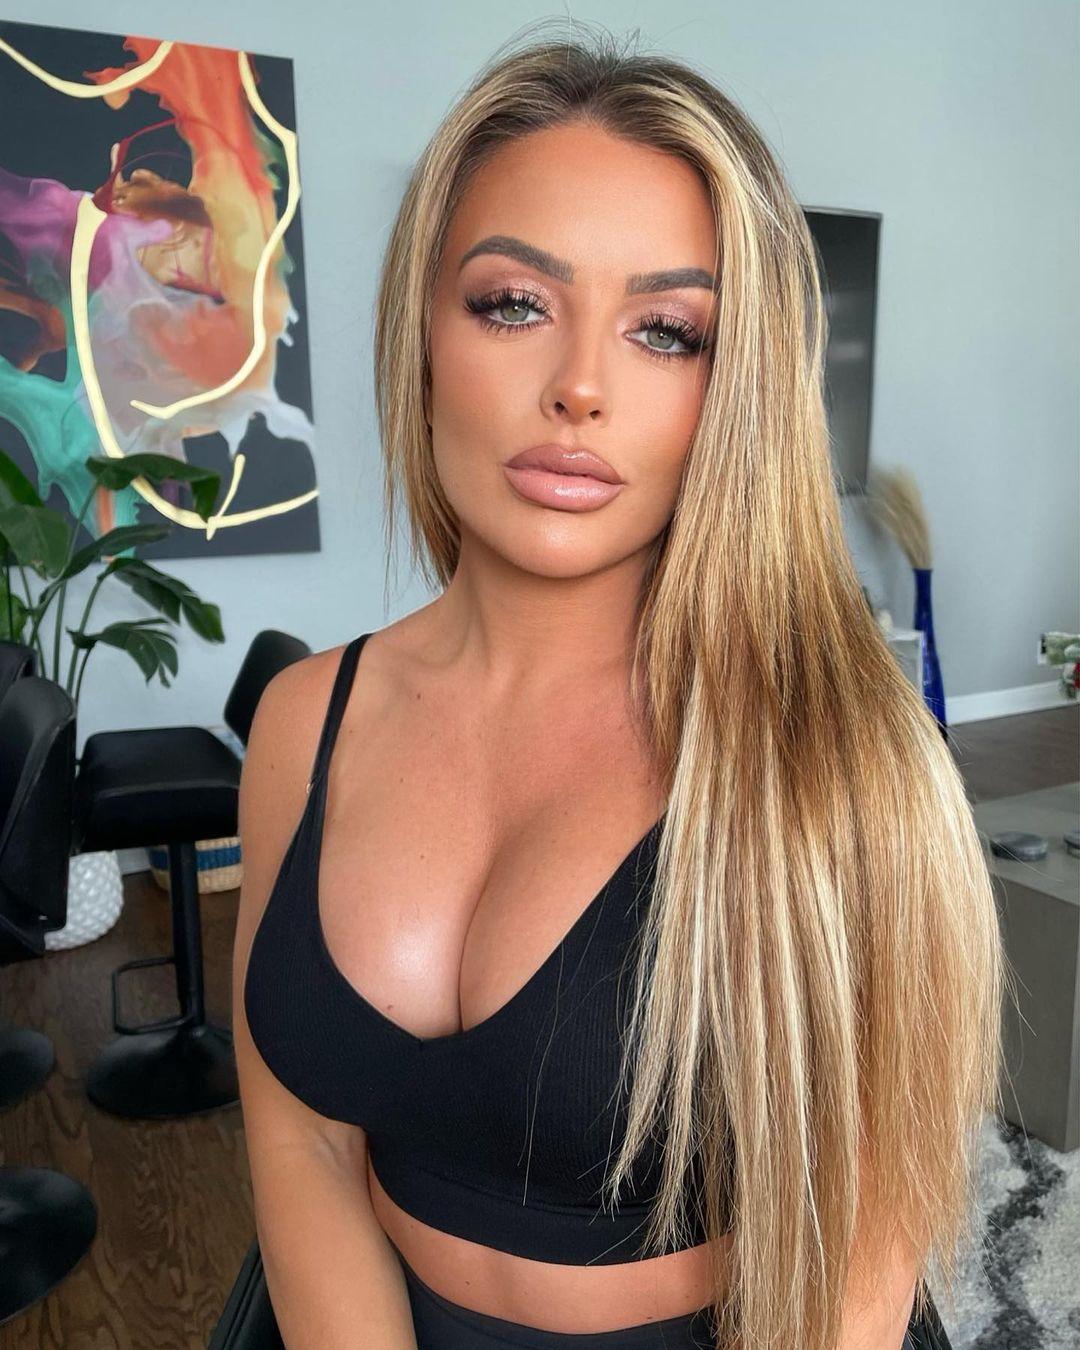 Mandy Rose's Chest Pops Out Of Tight Black Top In 'Sultry' Photo